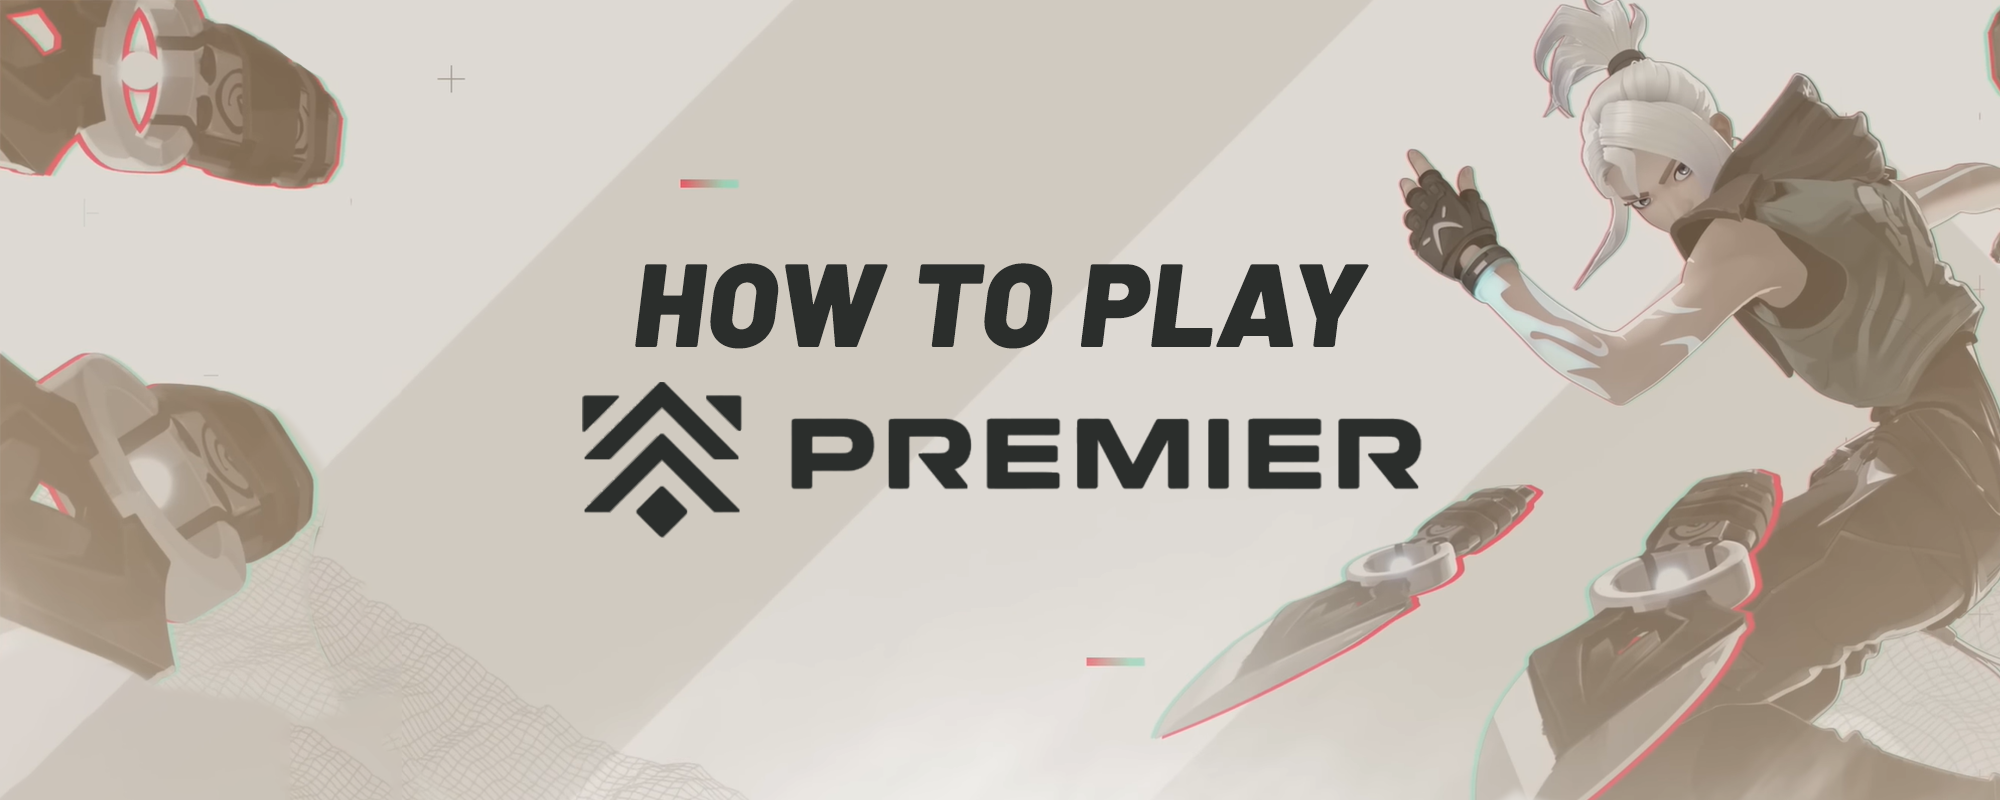 How to play in the Premier Open Beta